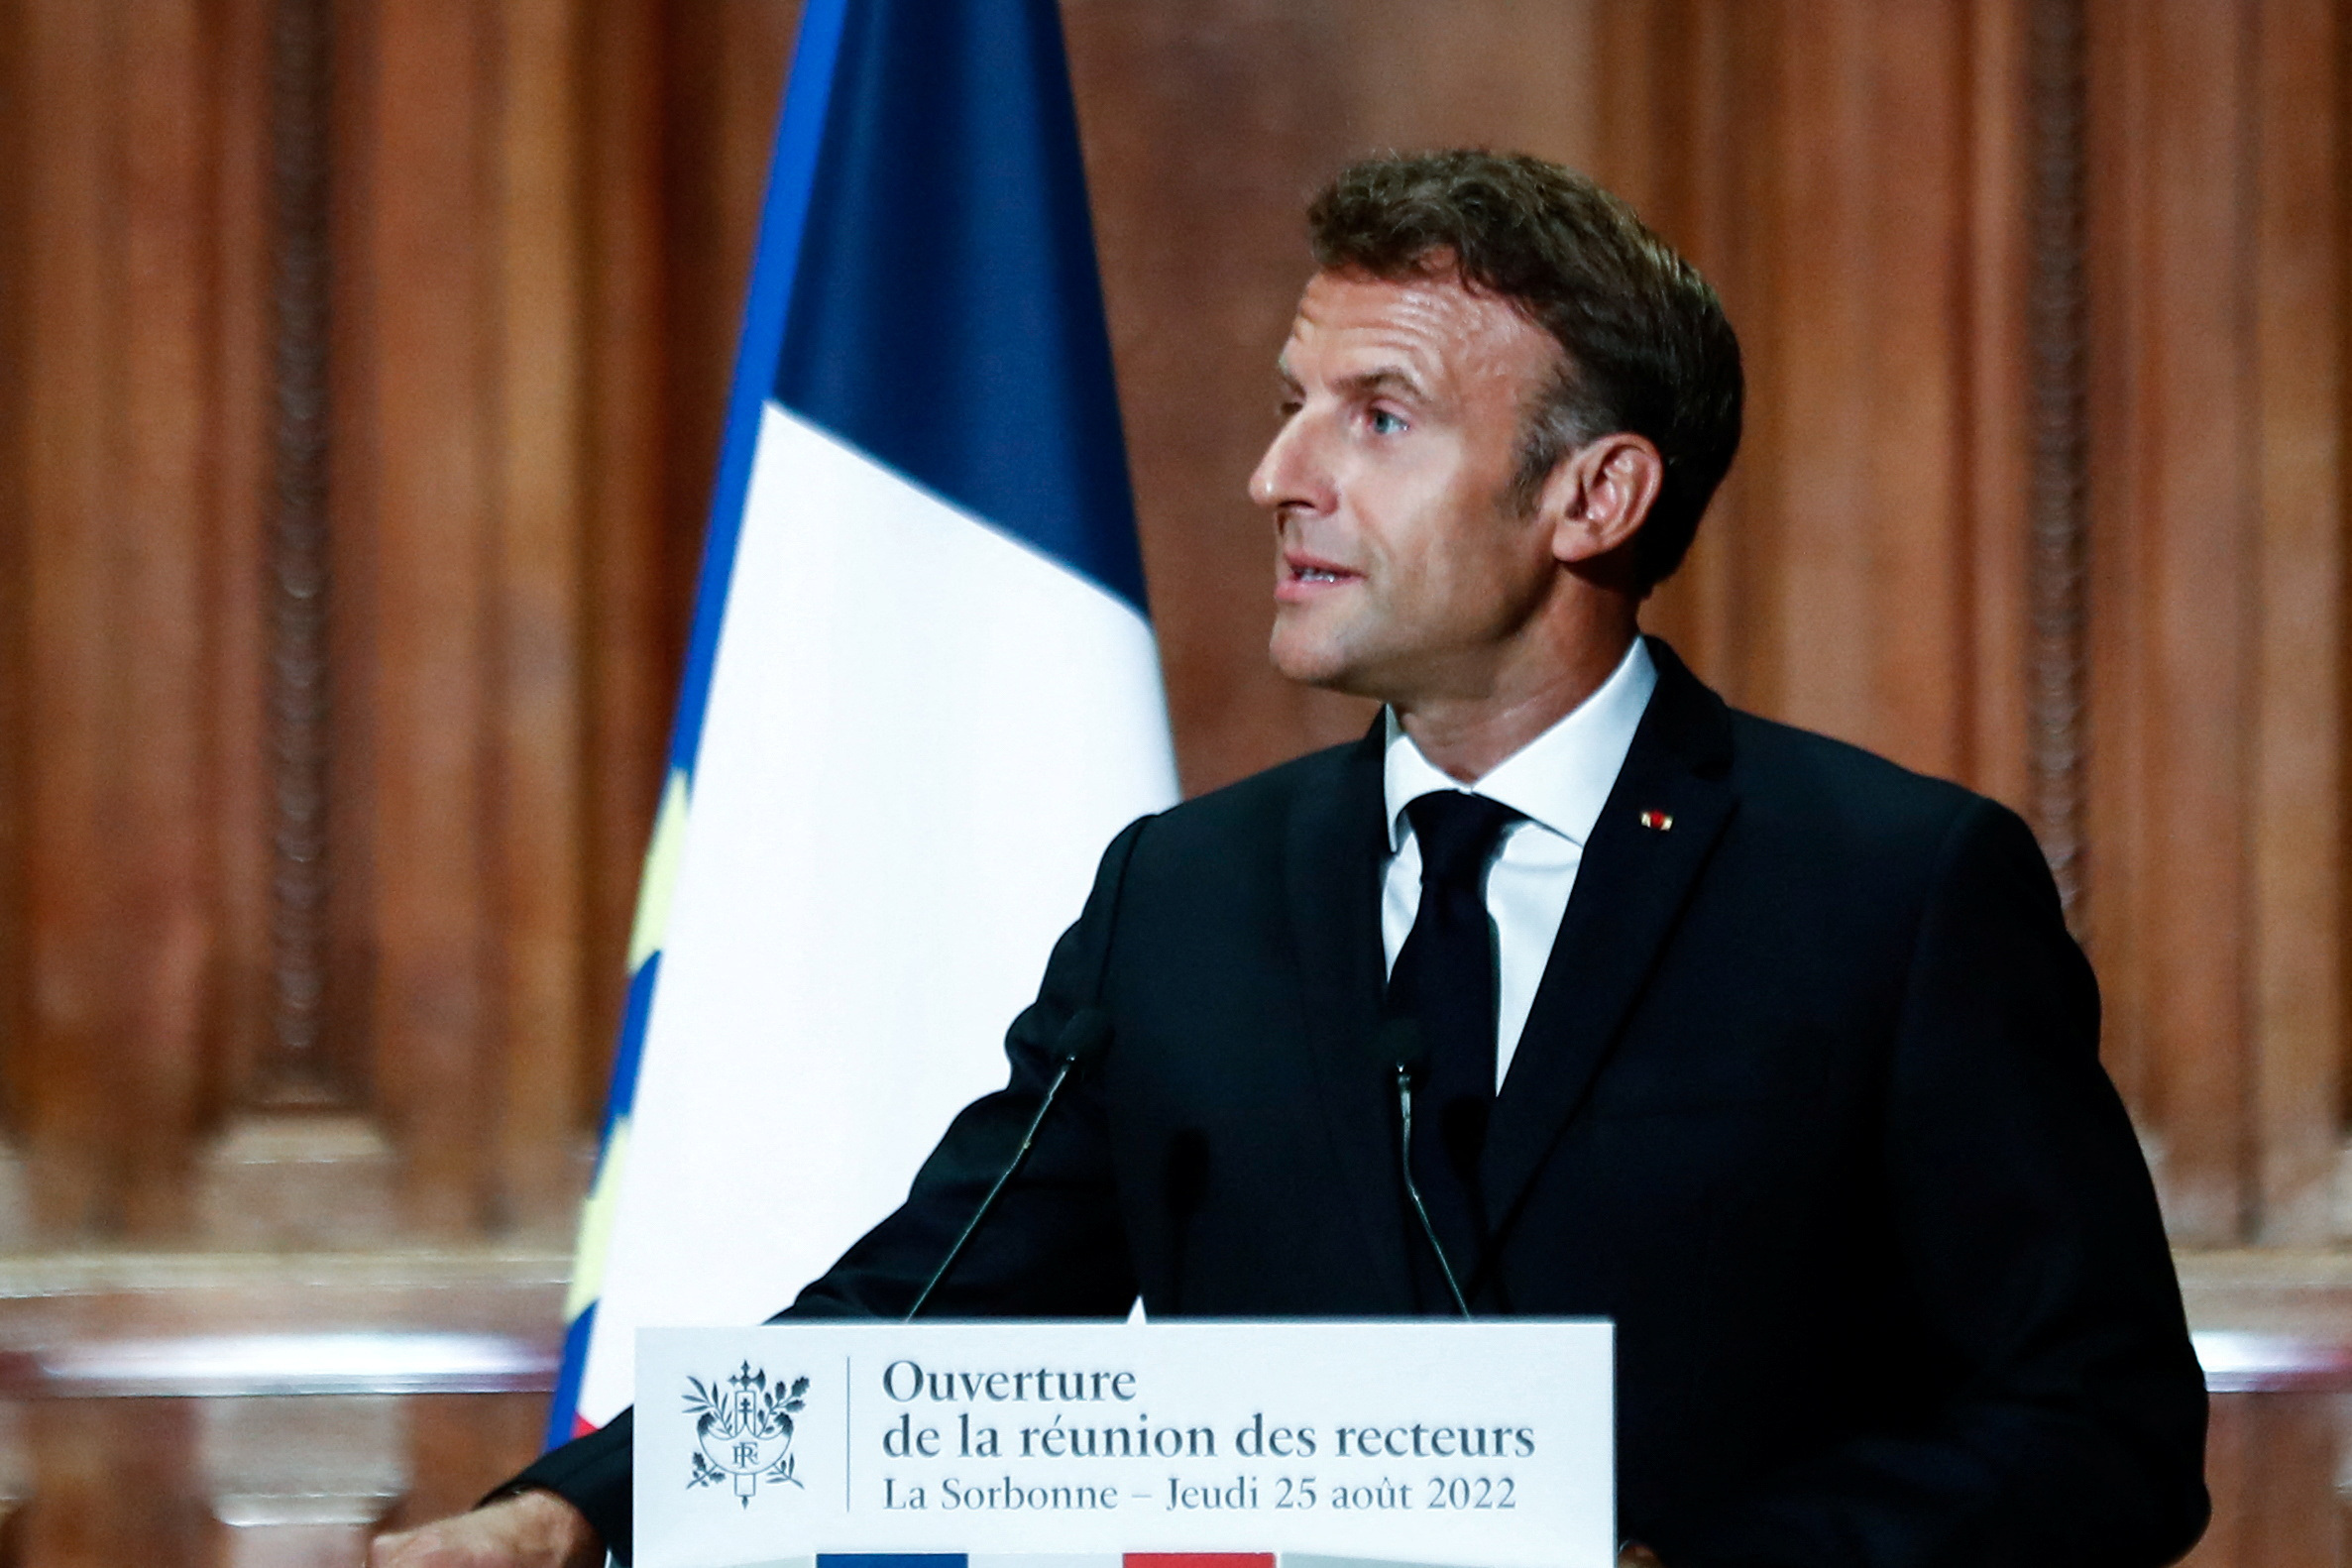 French President Macron attends a meeting on education at the Sorbonne university in Paris